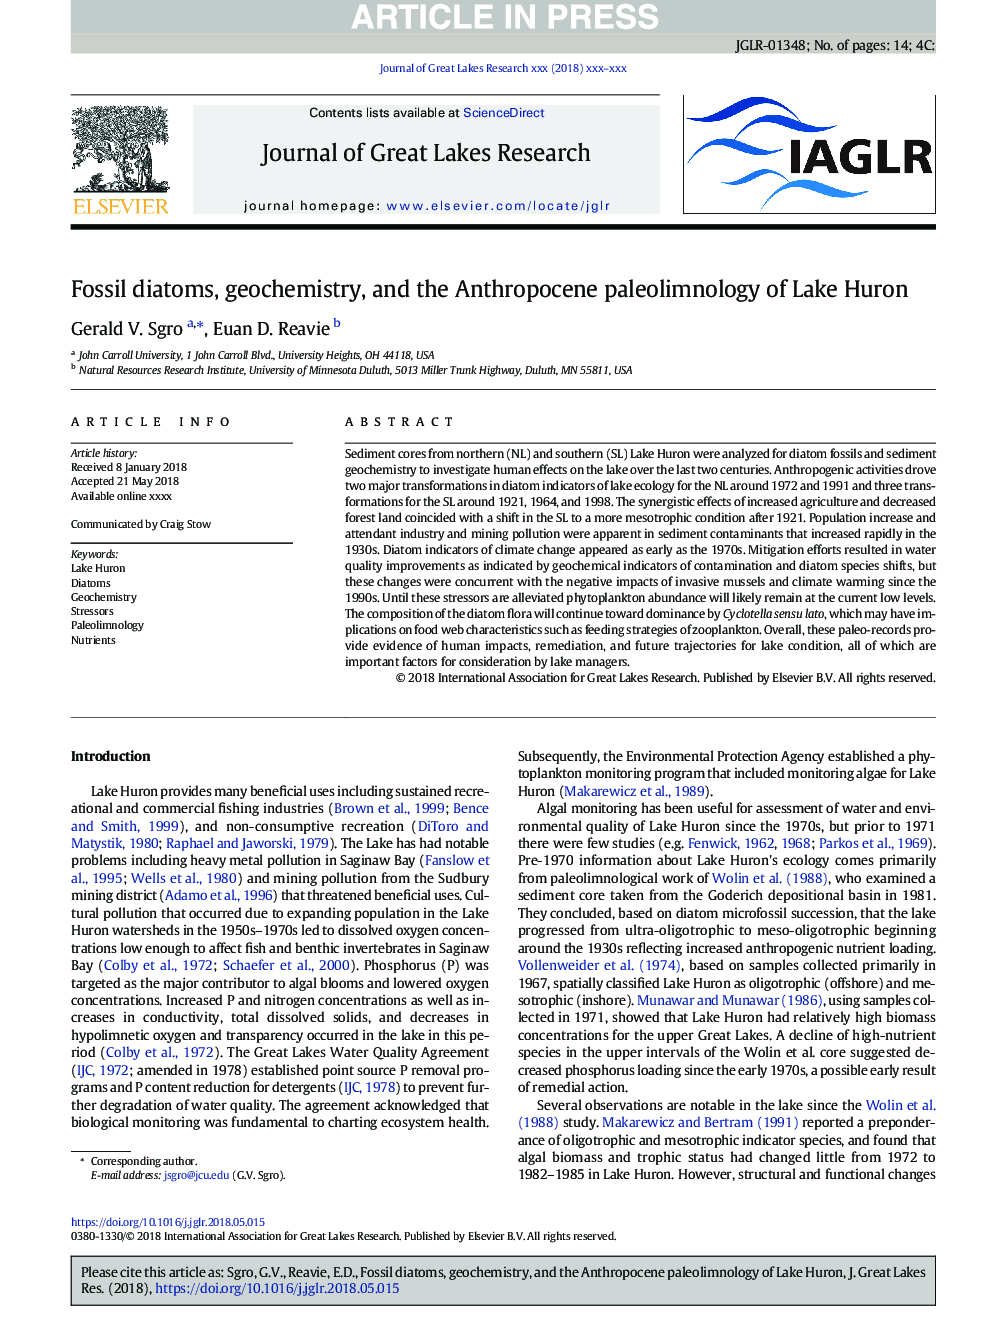 Fossil diatoms, geochemistry, and the Anthropocene paleolimnology of Lake Huron